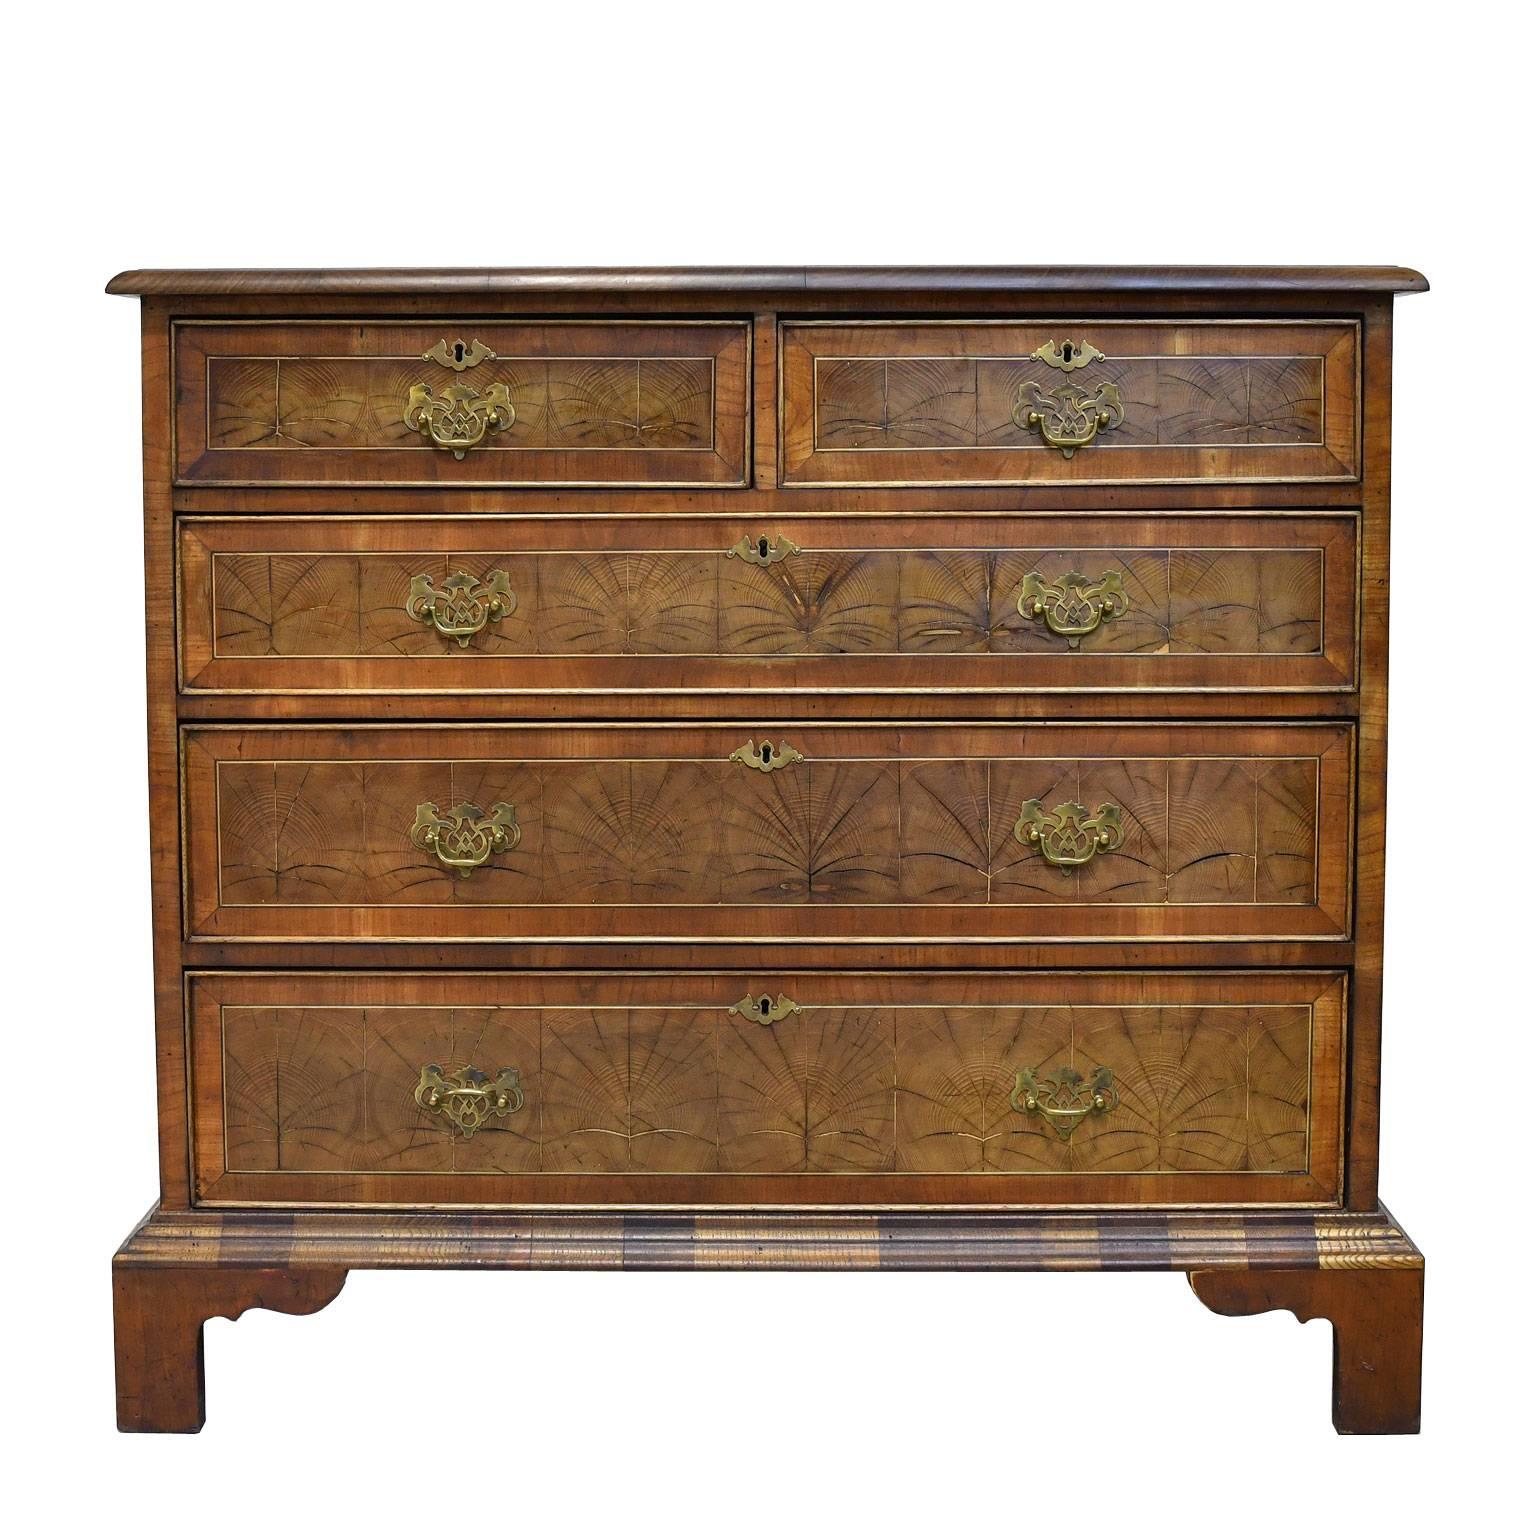 English George III Style Chest of Drawers with Yew-Wood Oyster Veneer